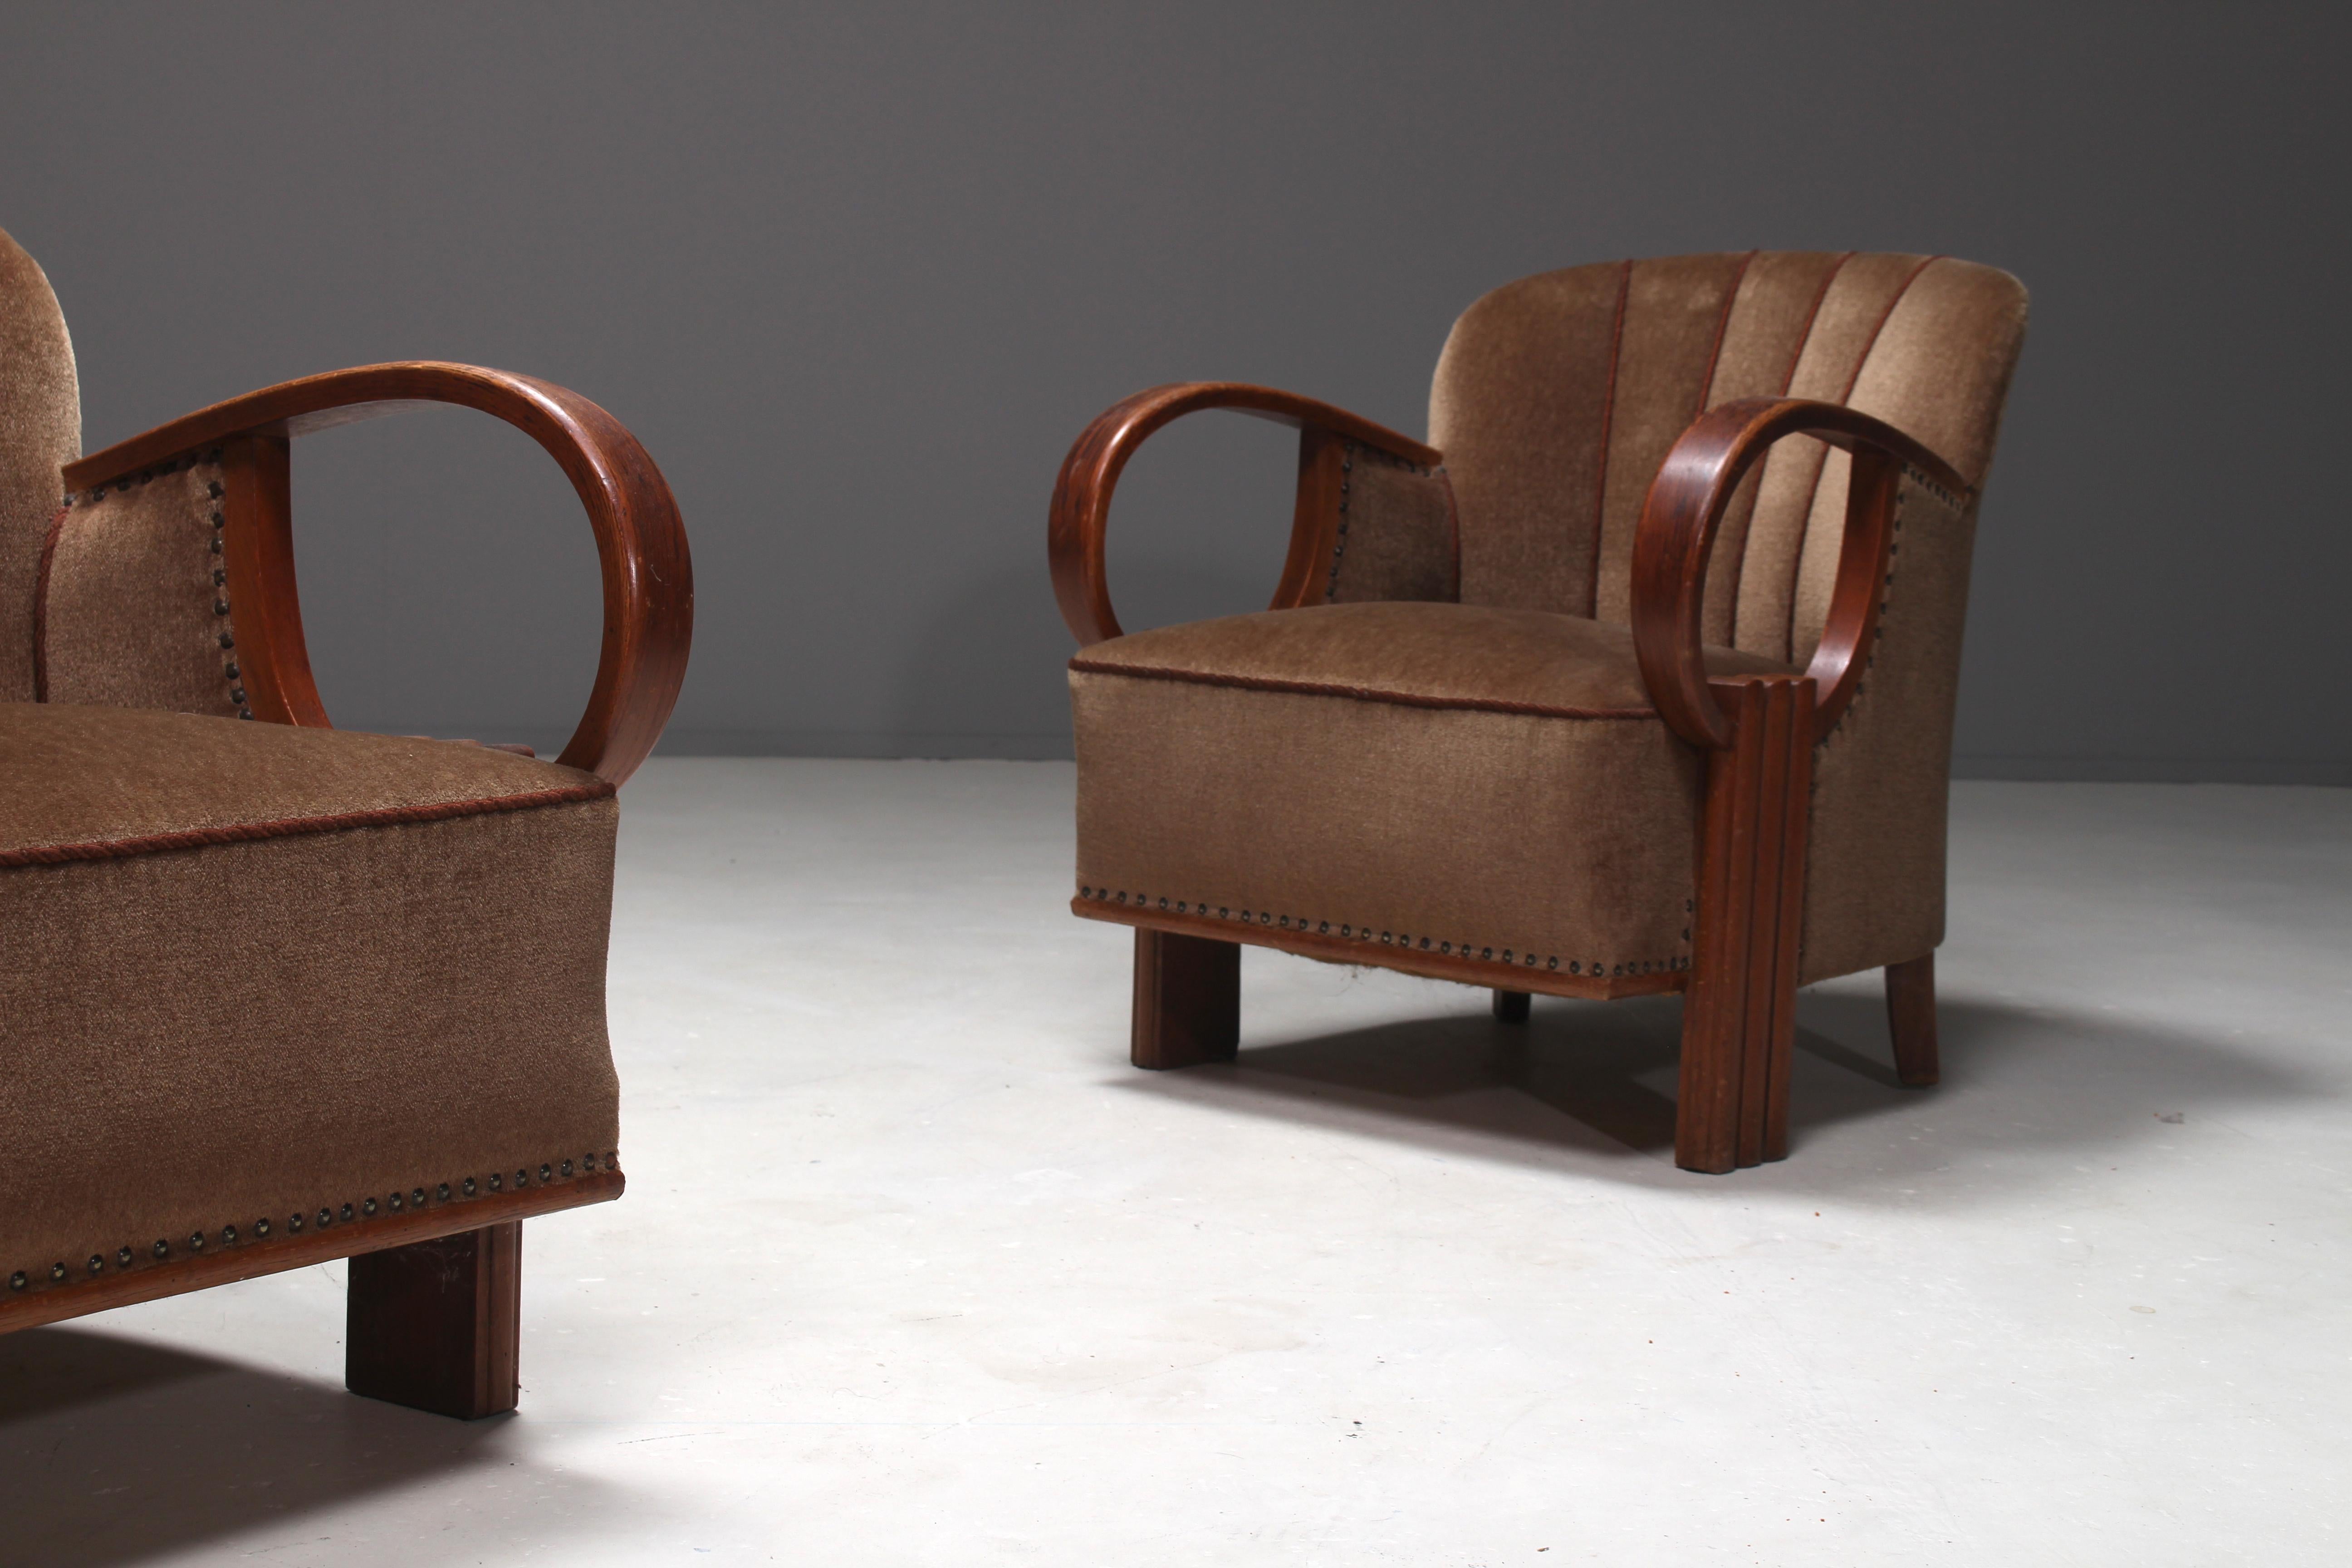 1930 chairs styles